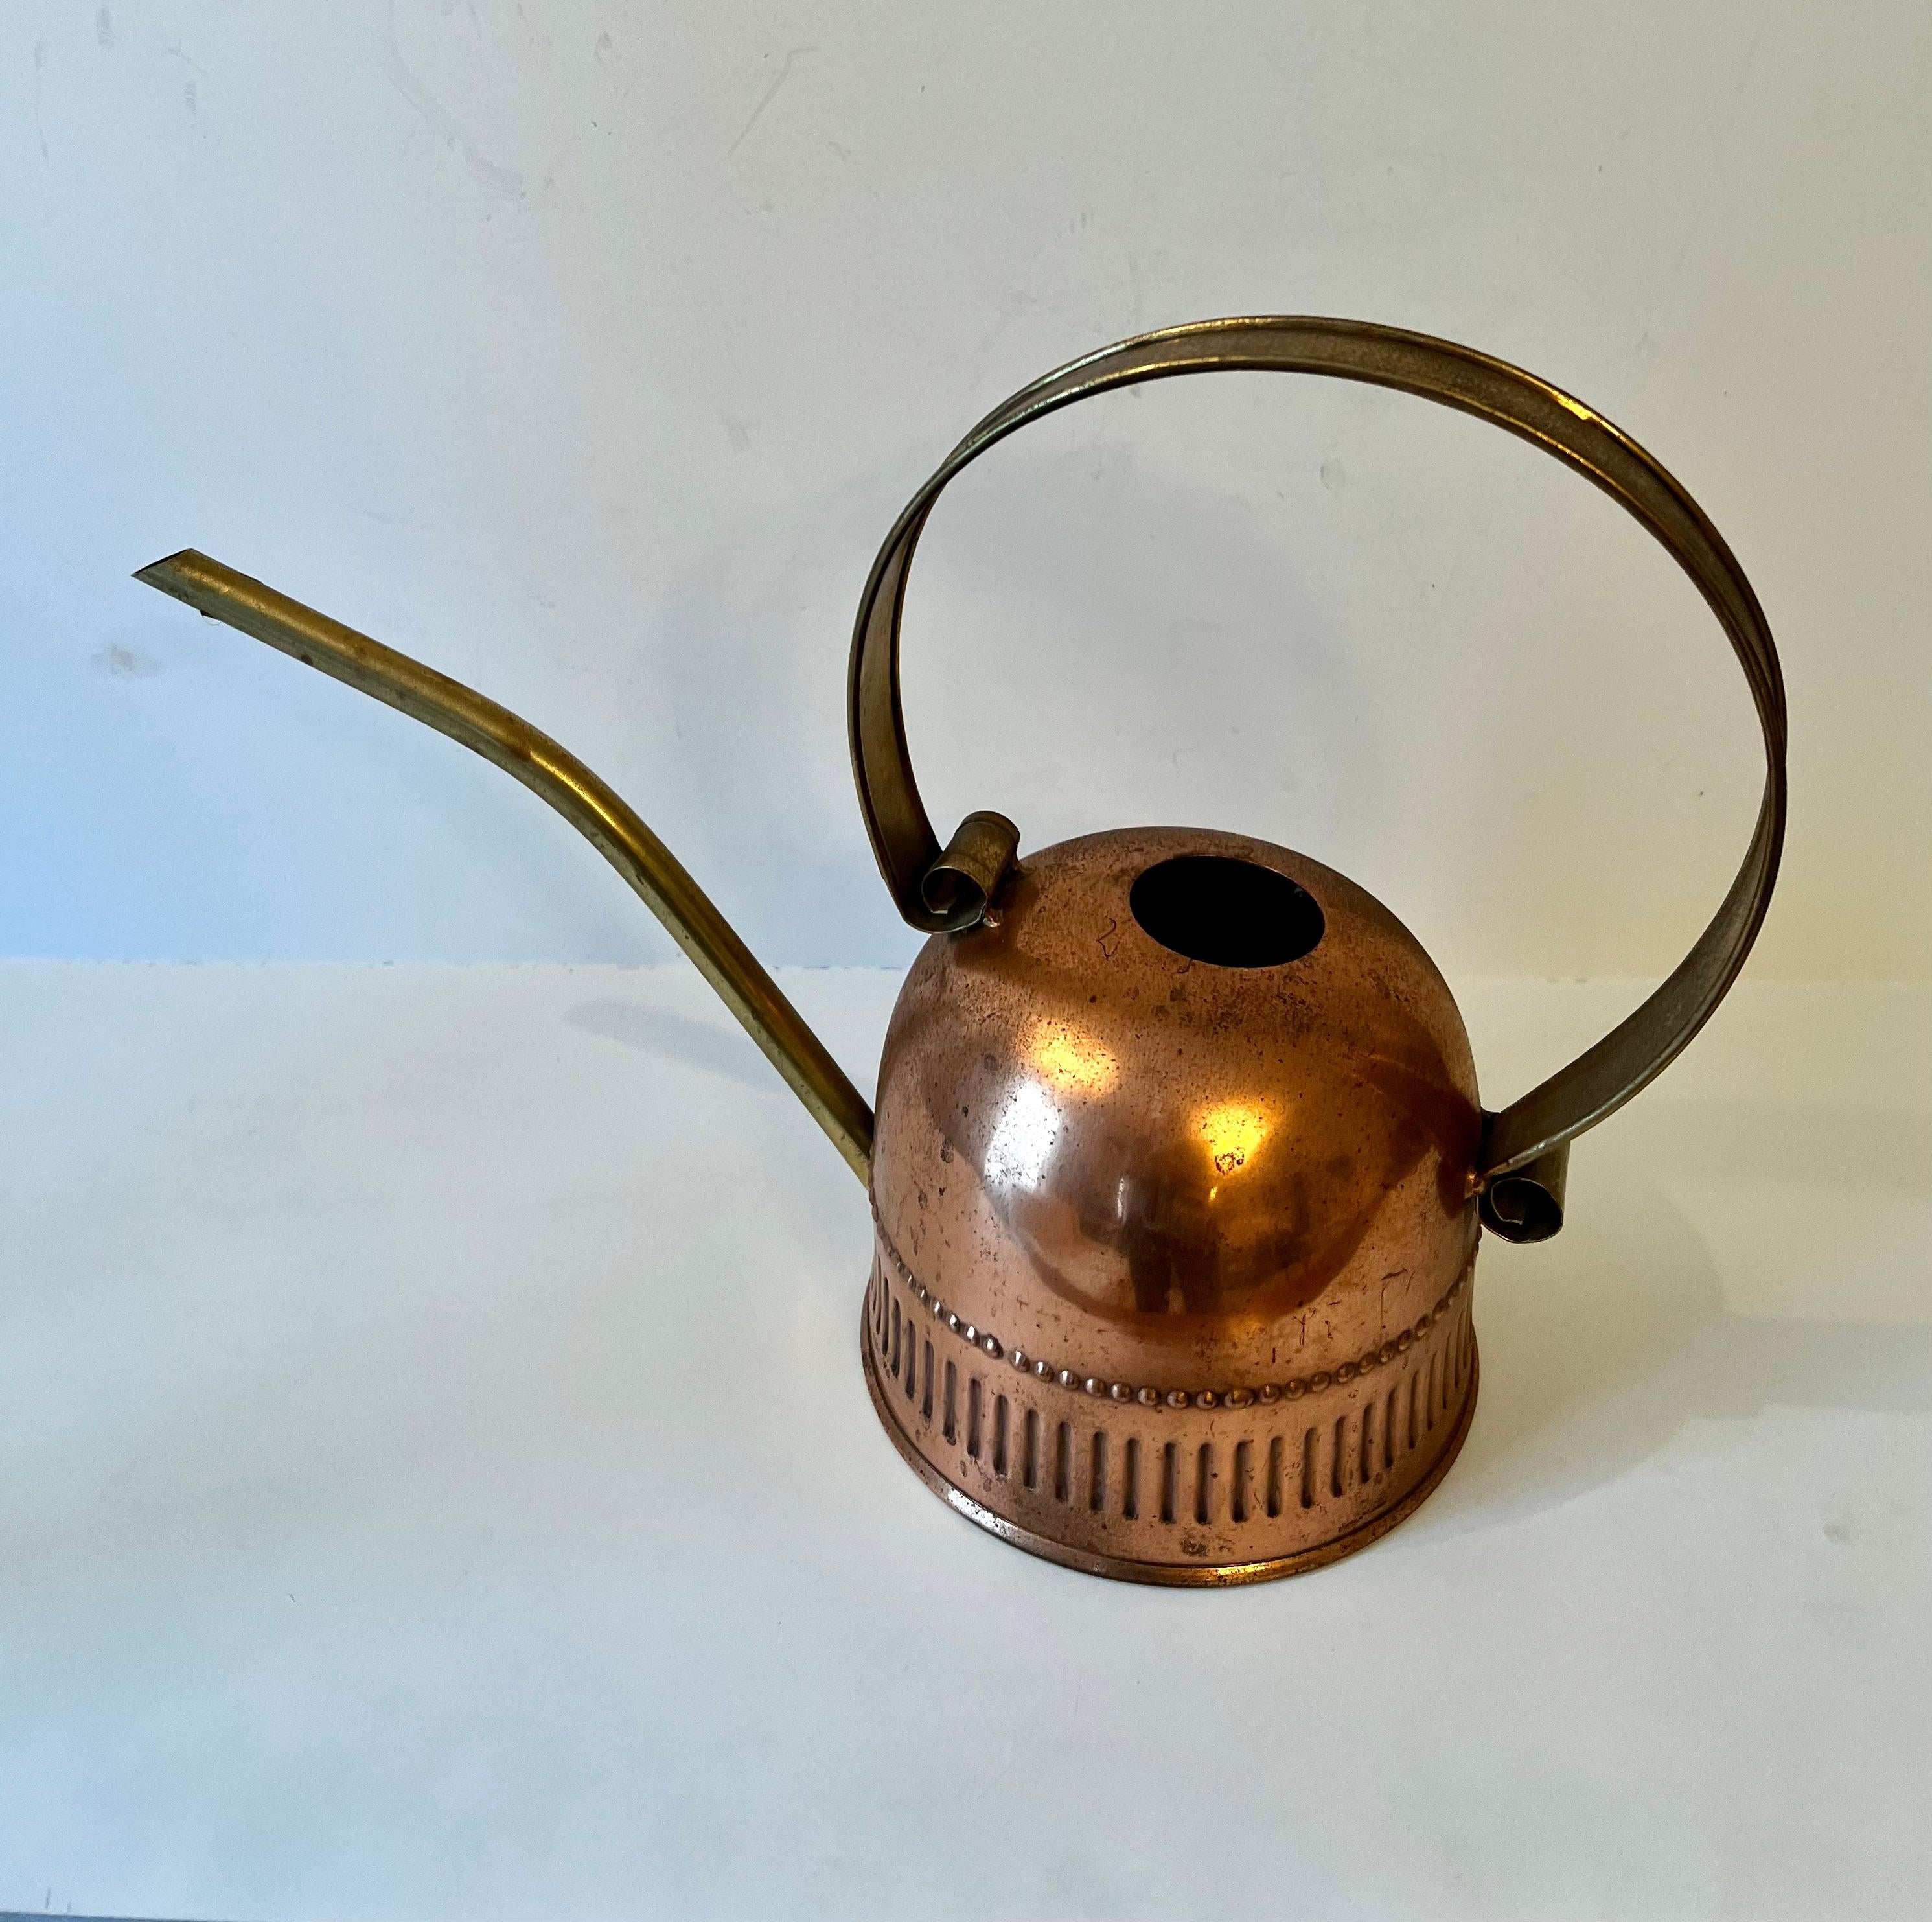 A lovely brass and copper watering can - perfectly suited for watering inside plants or smaller outside plants and a compliment as a decorative piece, in the house or on the patio.